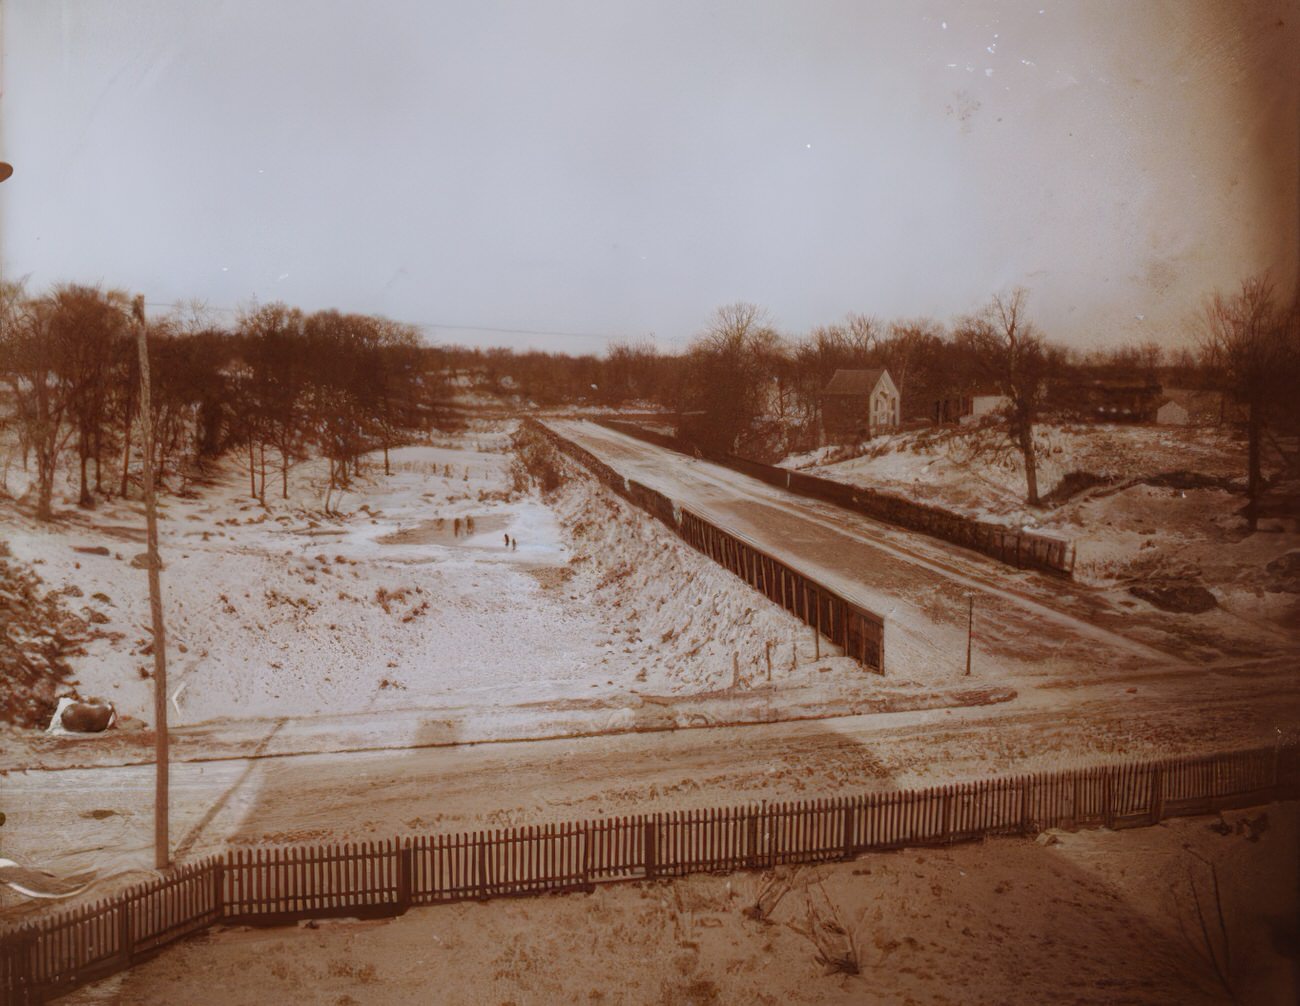 169Th Street And Ogden Avenue, An Undeveloped And Wooded Section Of The Bronx, Circa 1906.